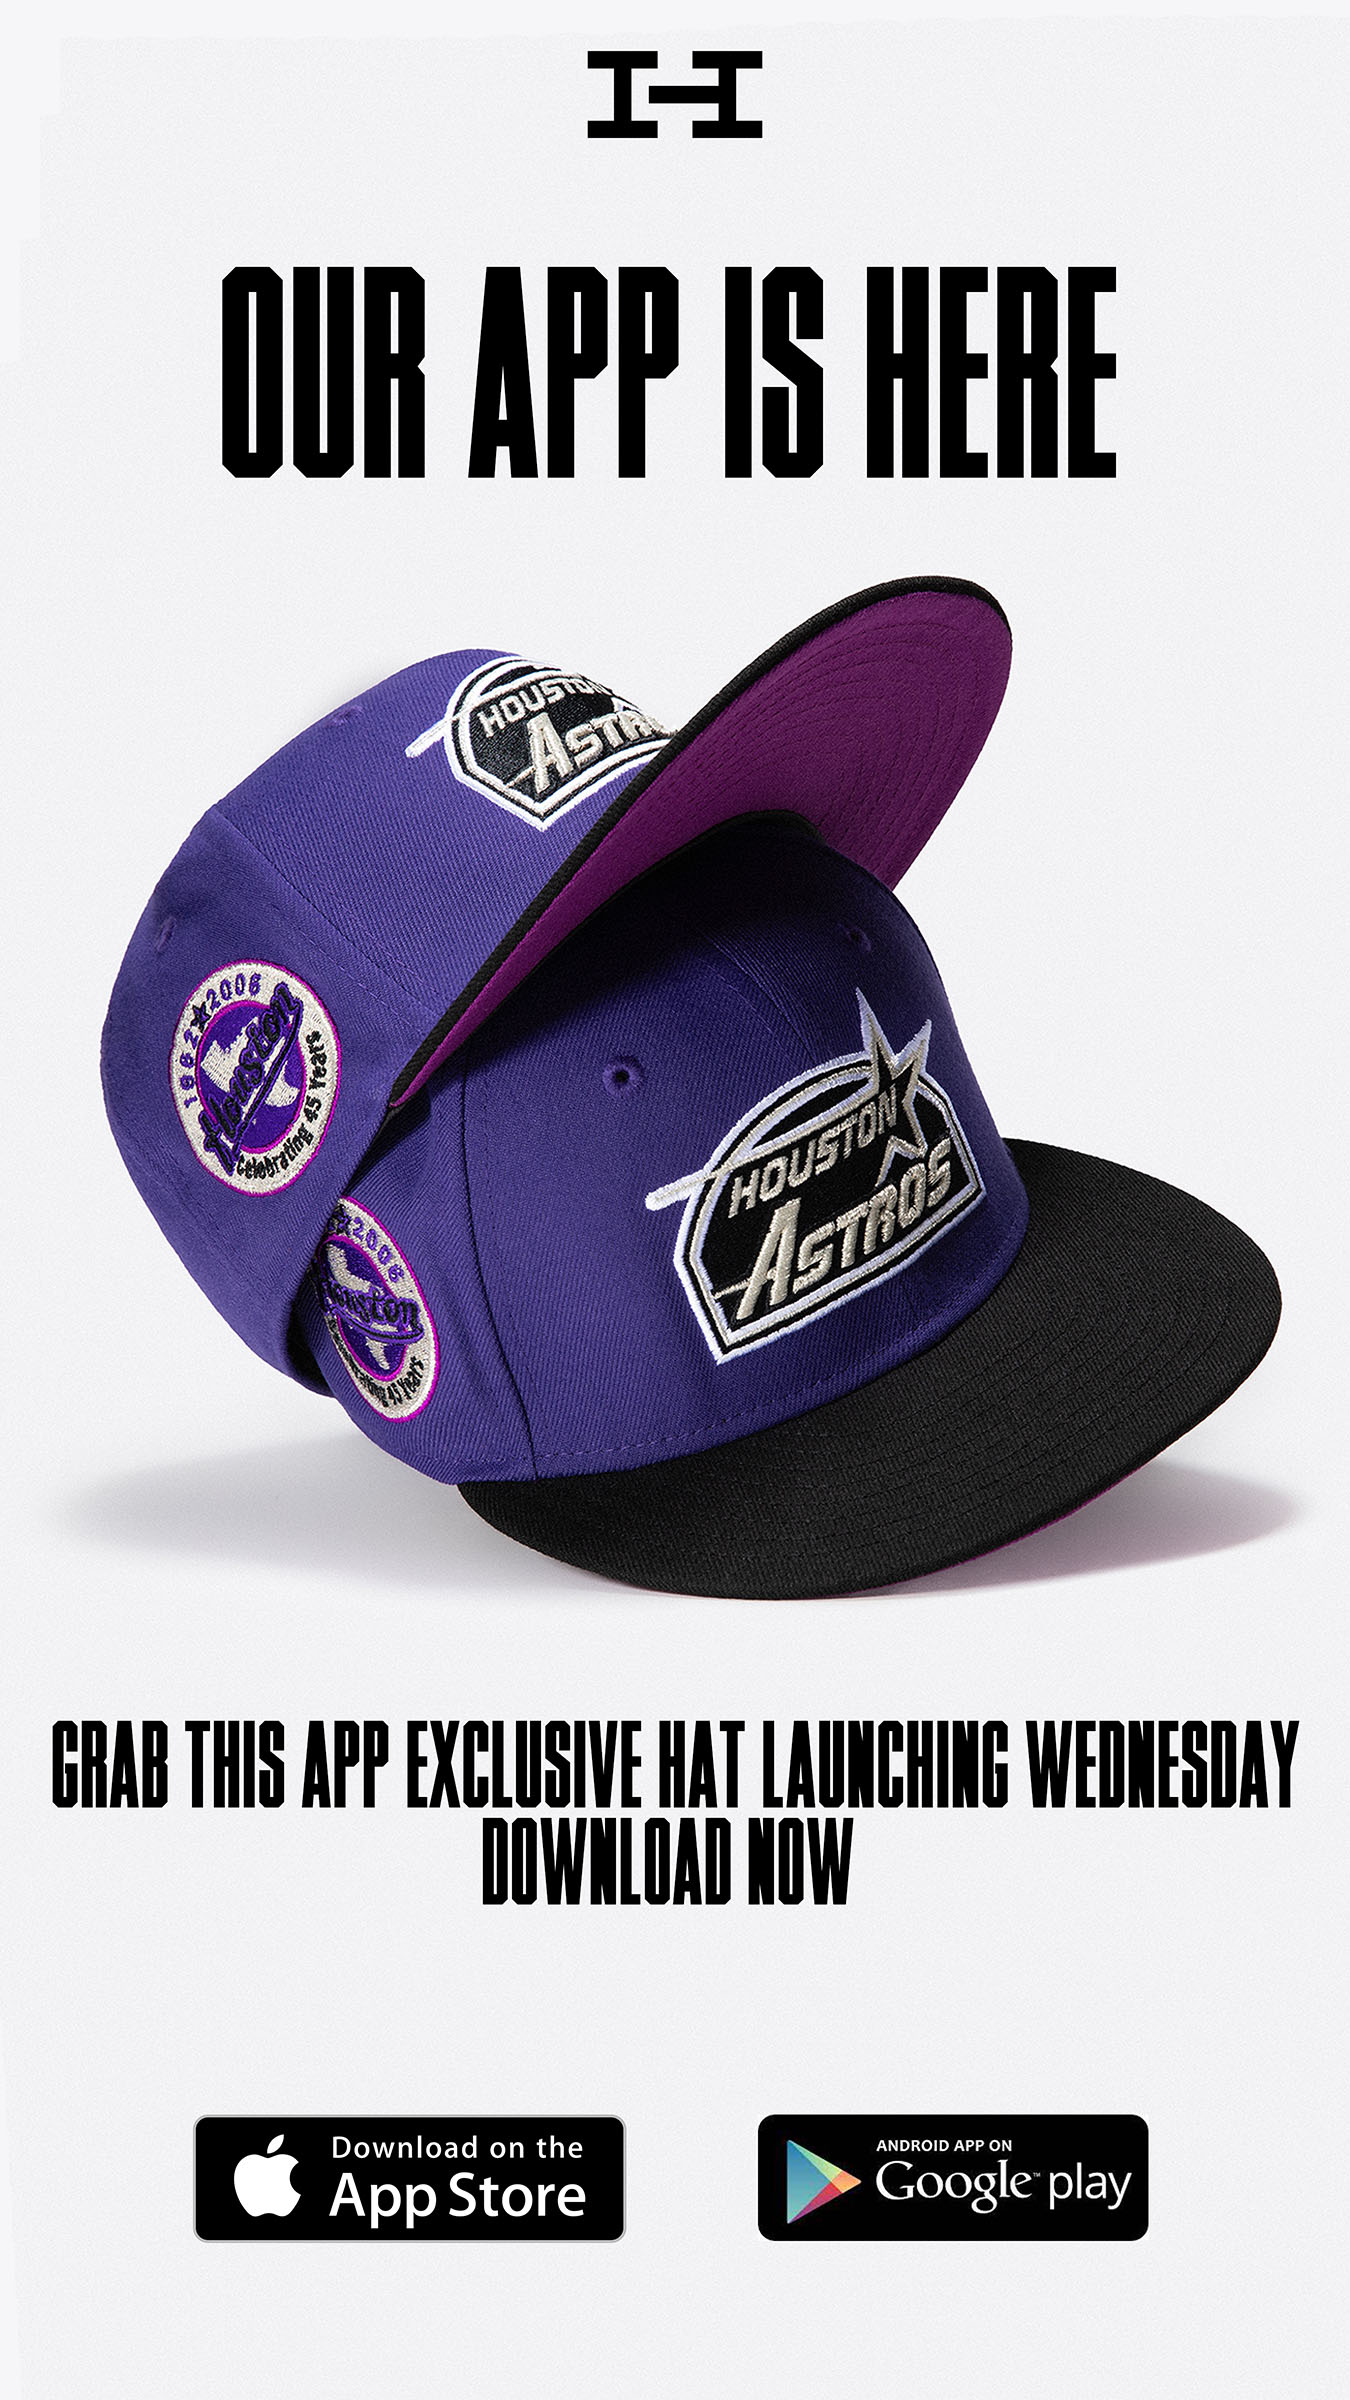 NEW FITTEDS AND APP EXCLUSIVE! - Hat Club